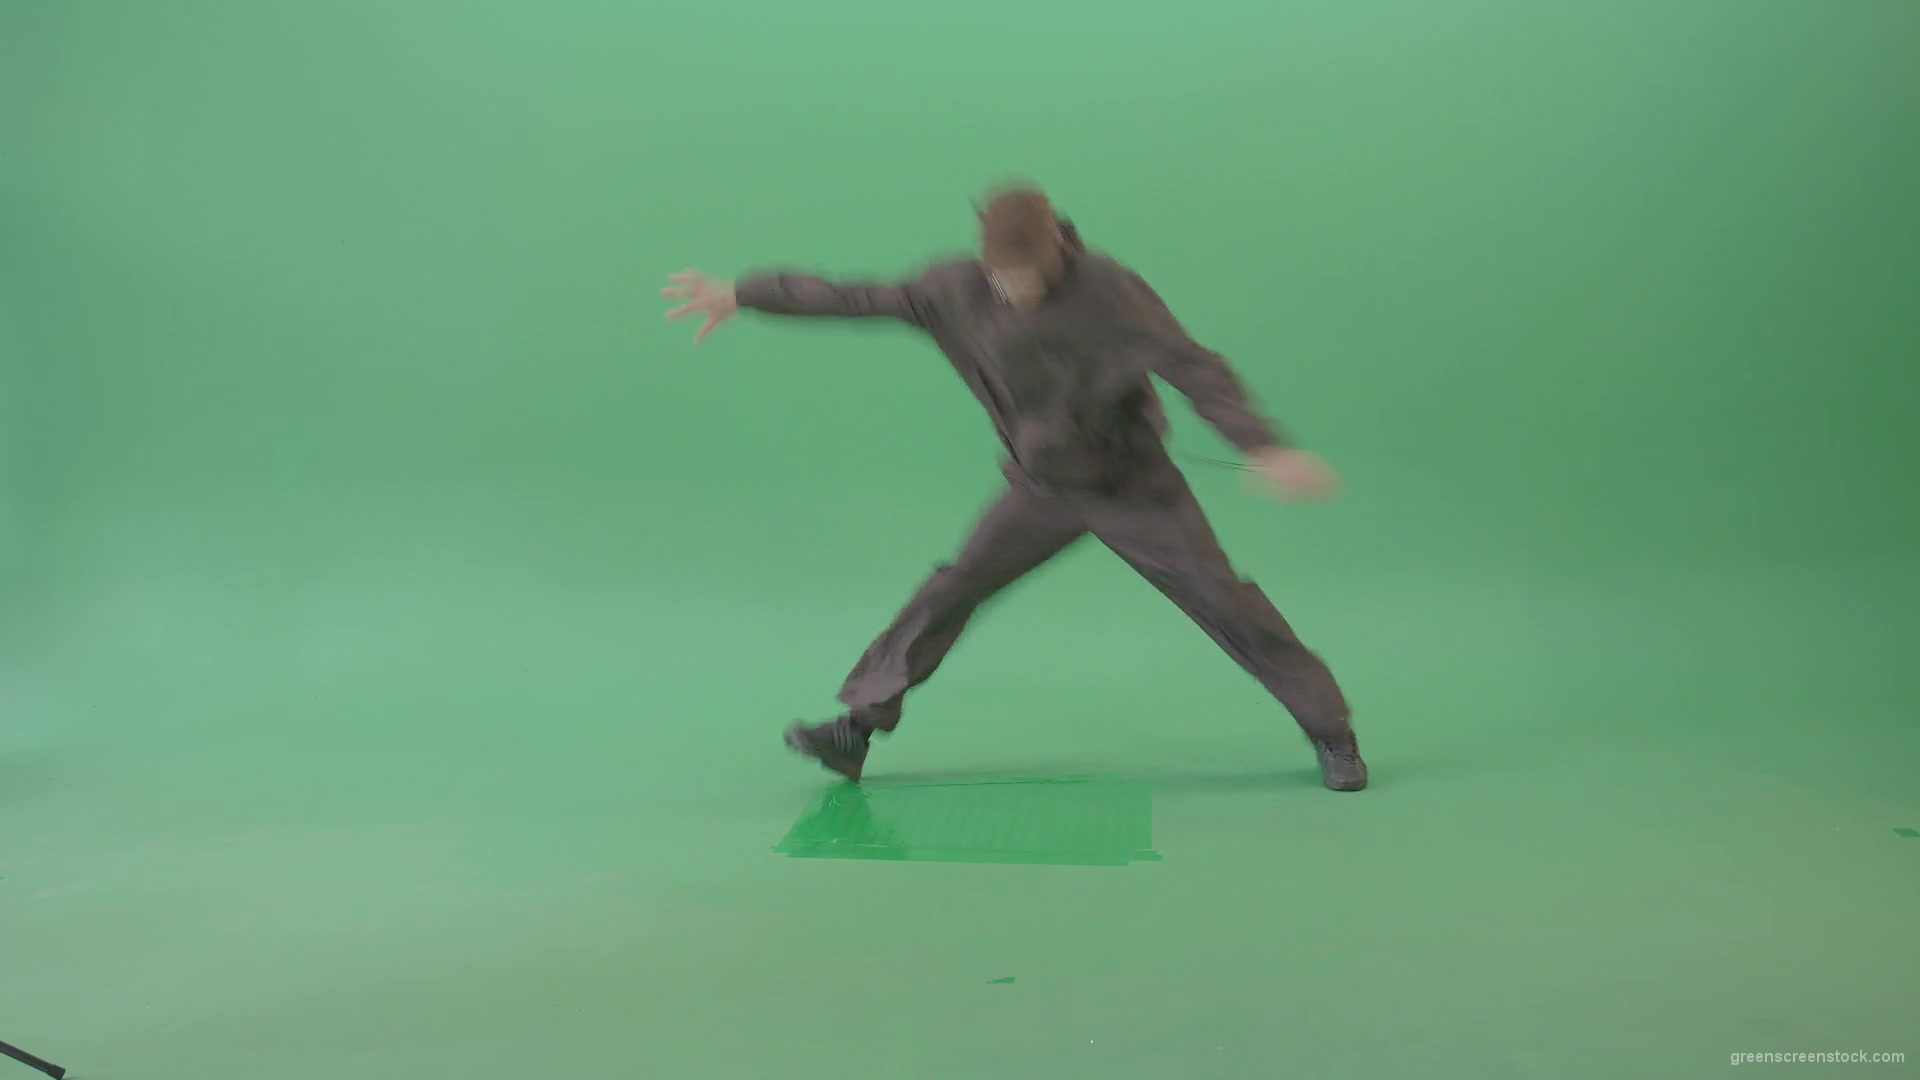 B-Boy-breakdance-man-making-power-moves-isolated-on-green-screen-4K-Video-Footage-1920_004 Green Screen Stock